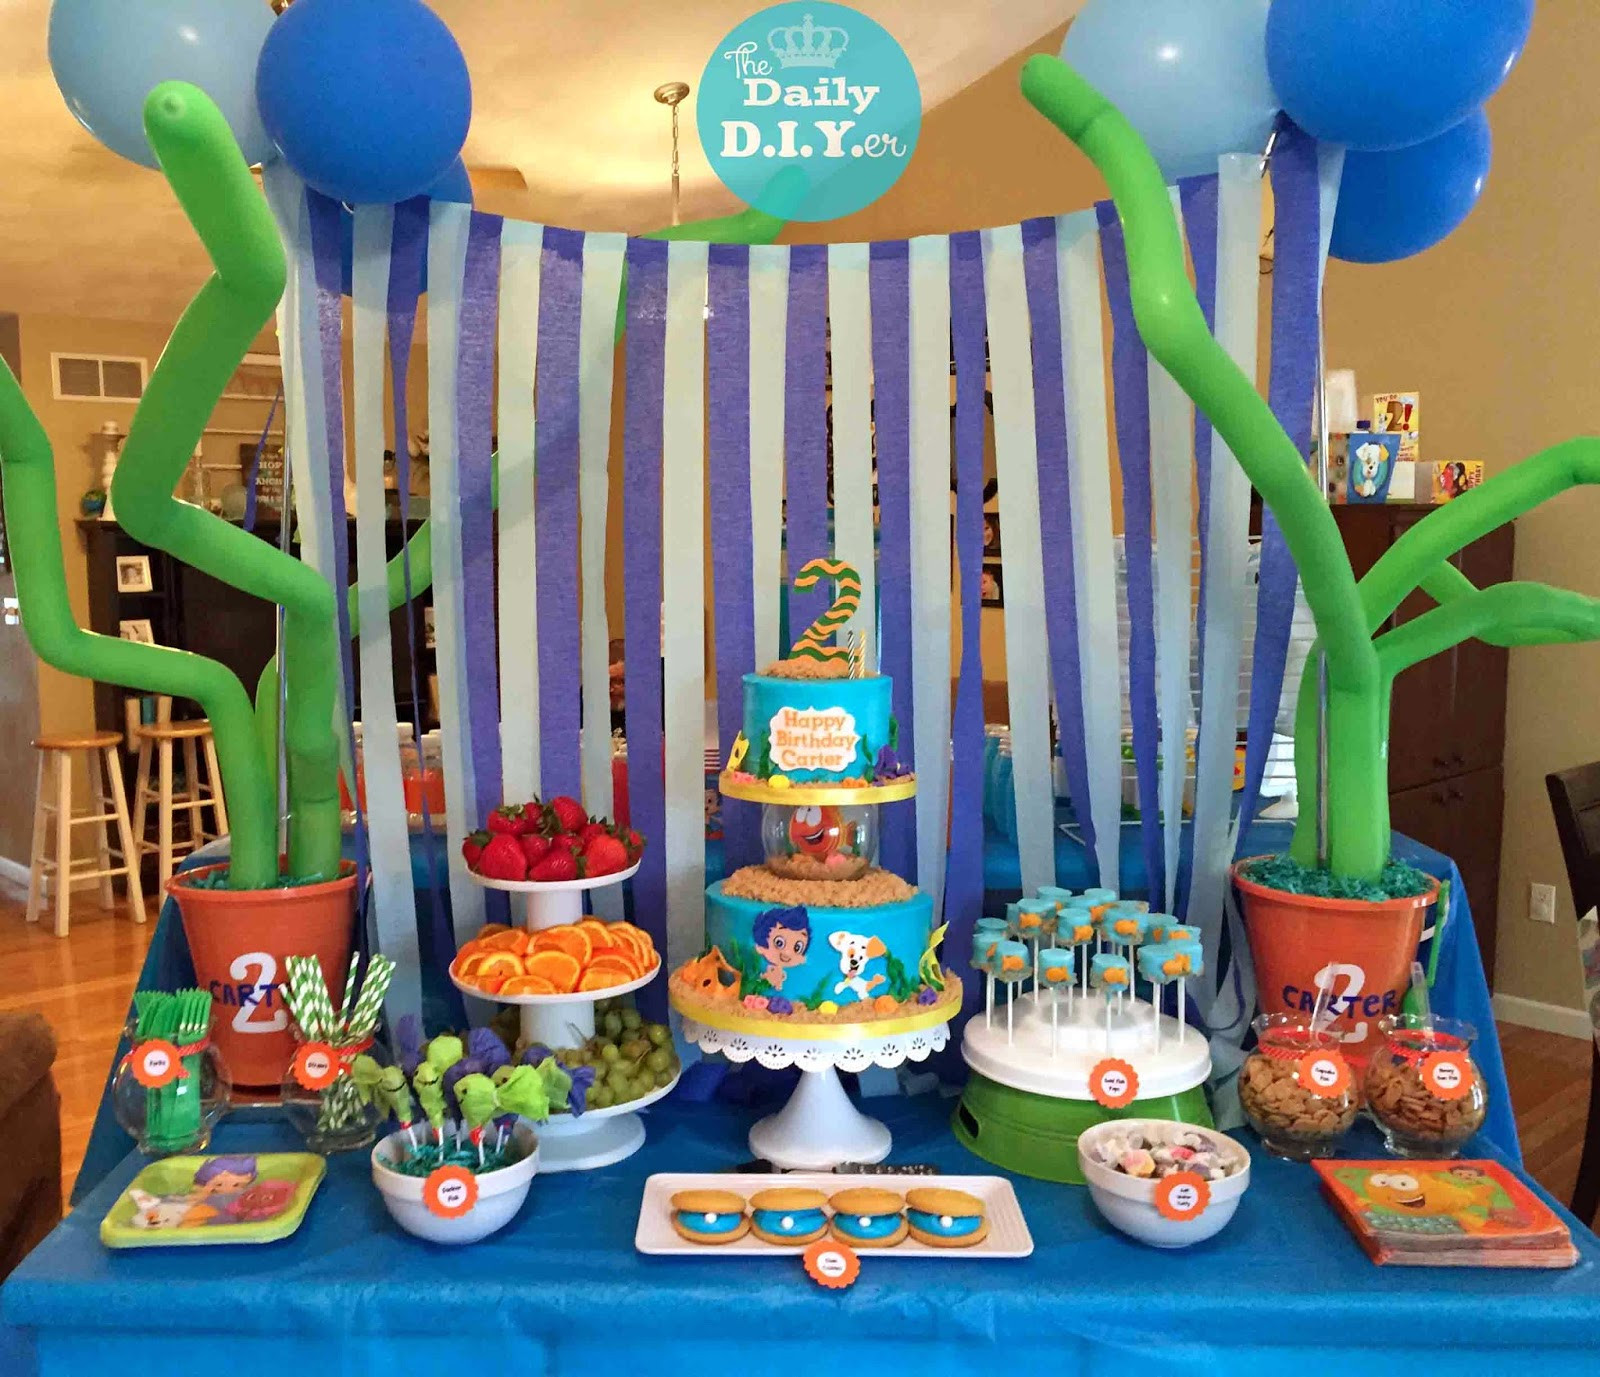 Bubble Guppies Party Food Ideas
 The Daily DIYer Bubble Guppies Party Food